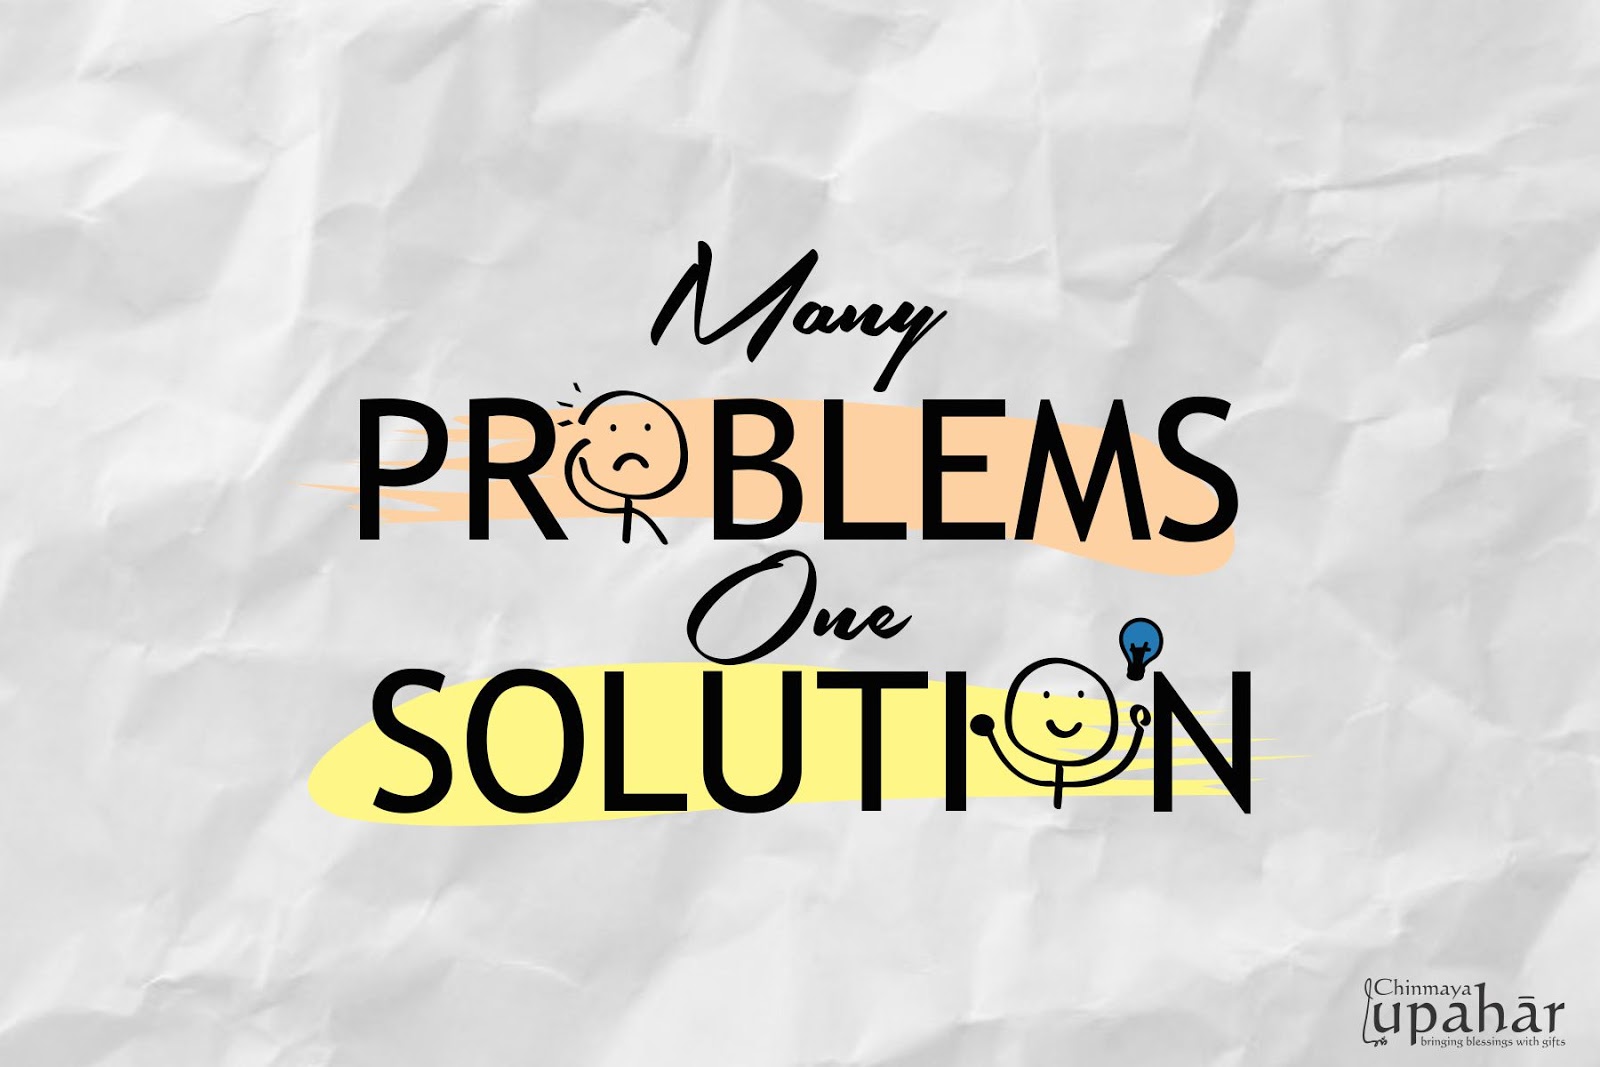 Get The Guaranteed Solution To All The Major Problems!